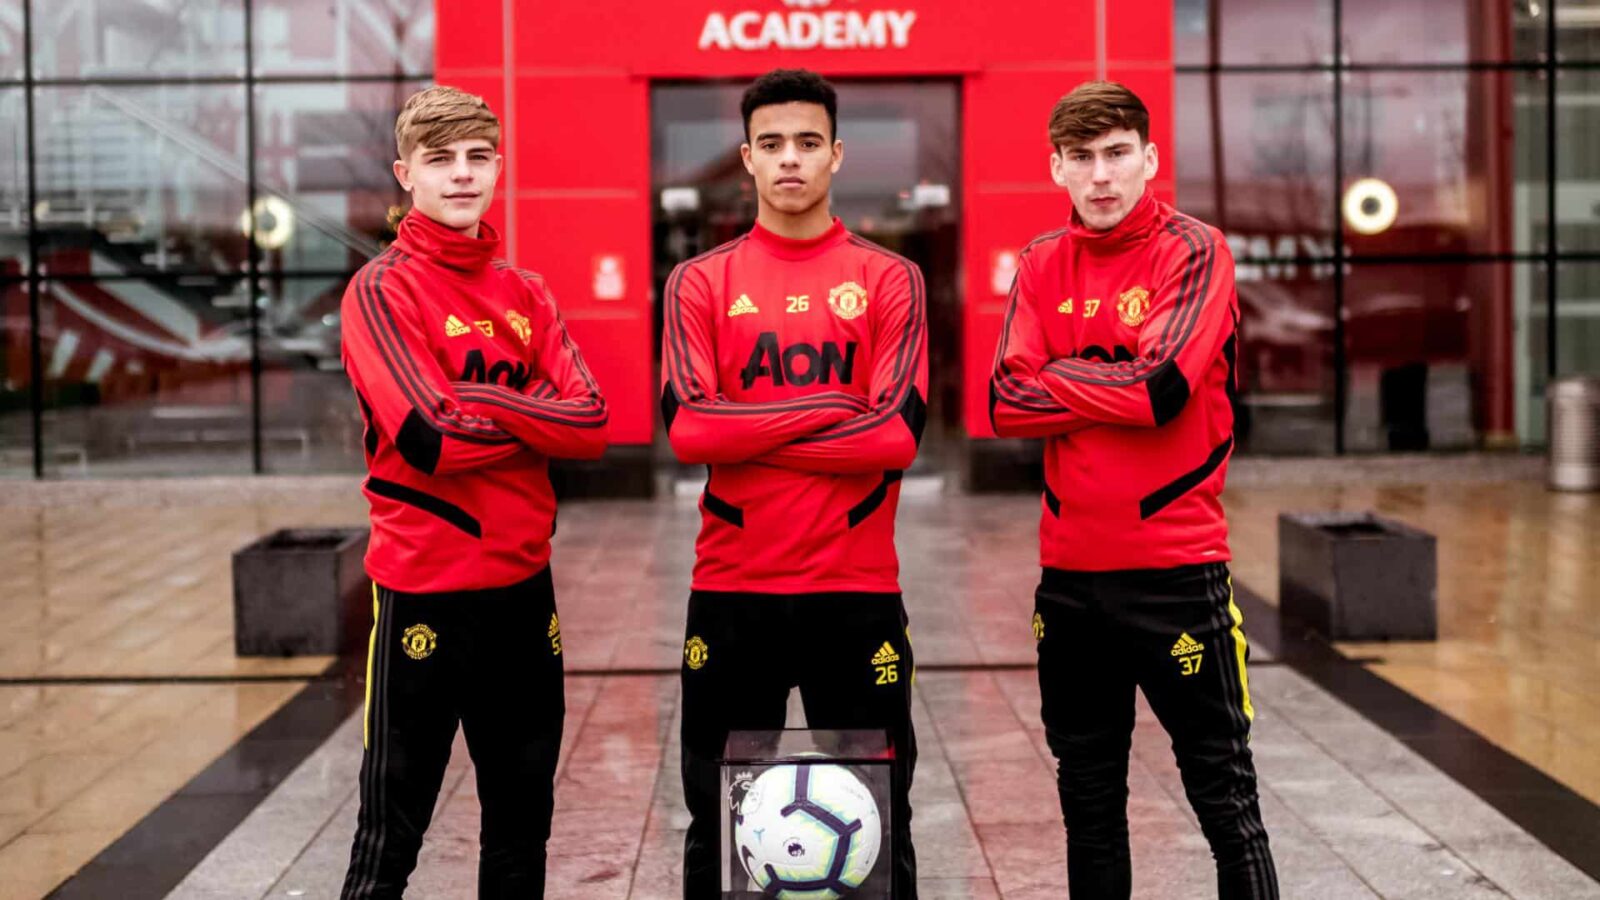 Manchester United to line up Academy goalkeepers next season